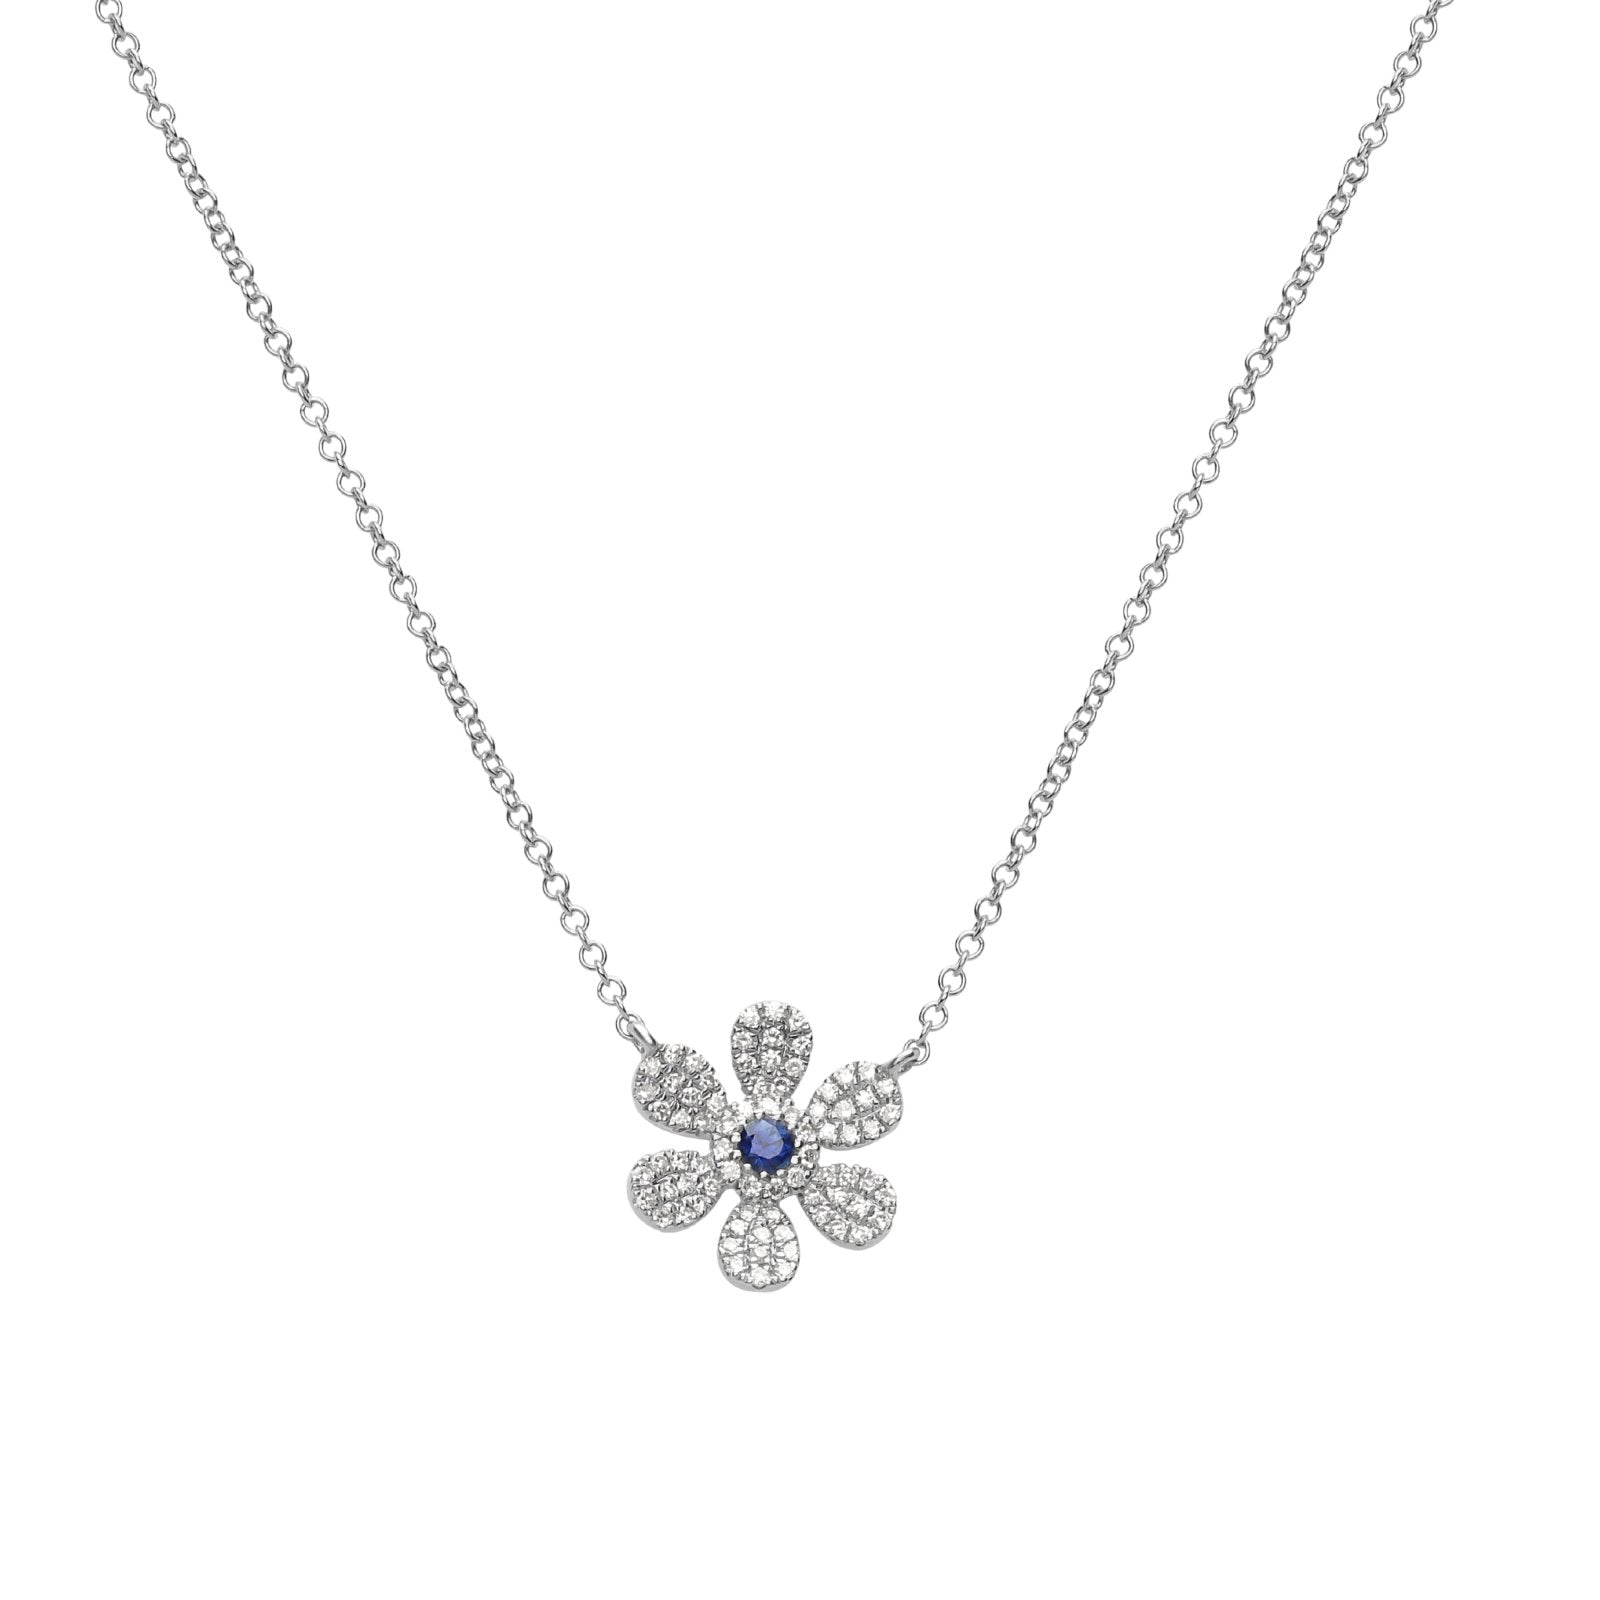 This 14k white gold diamond pave flower necklace features 0.44 carats of  round brilliant diamonds.